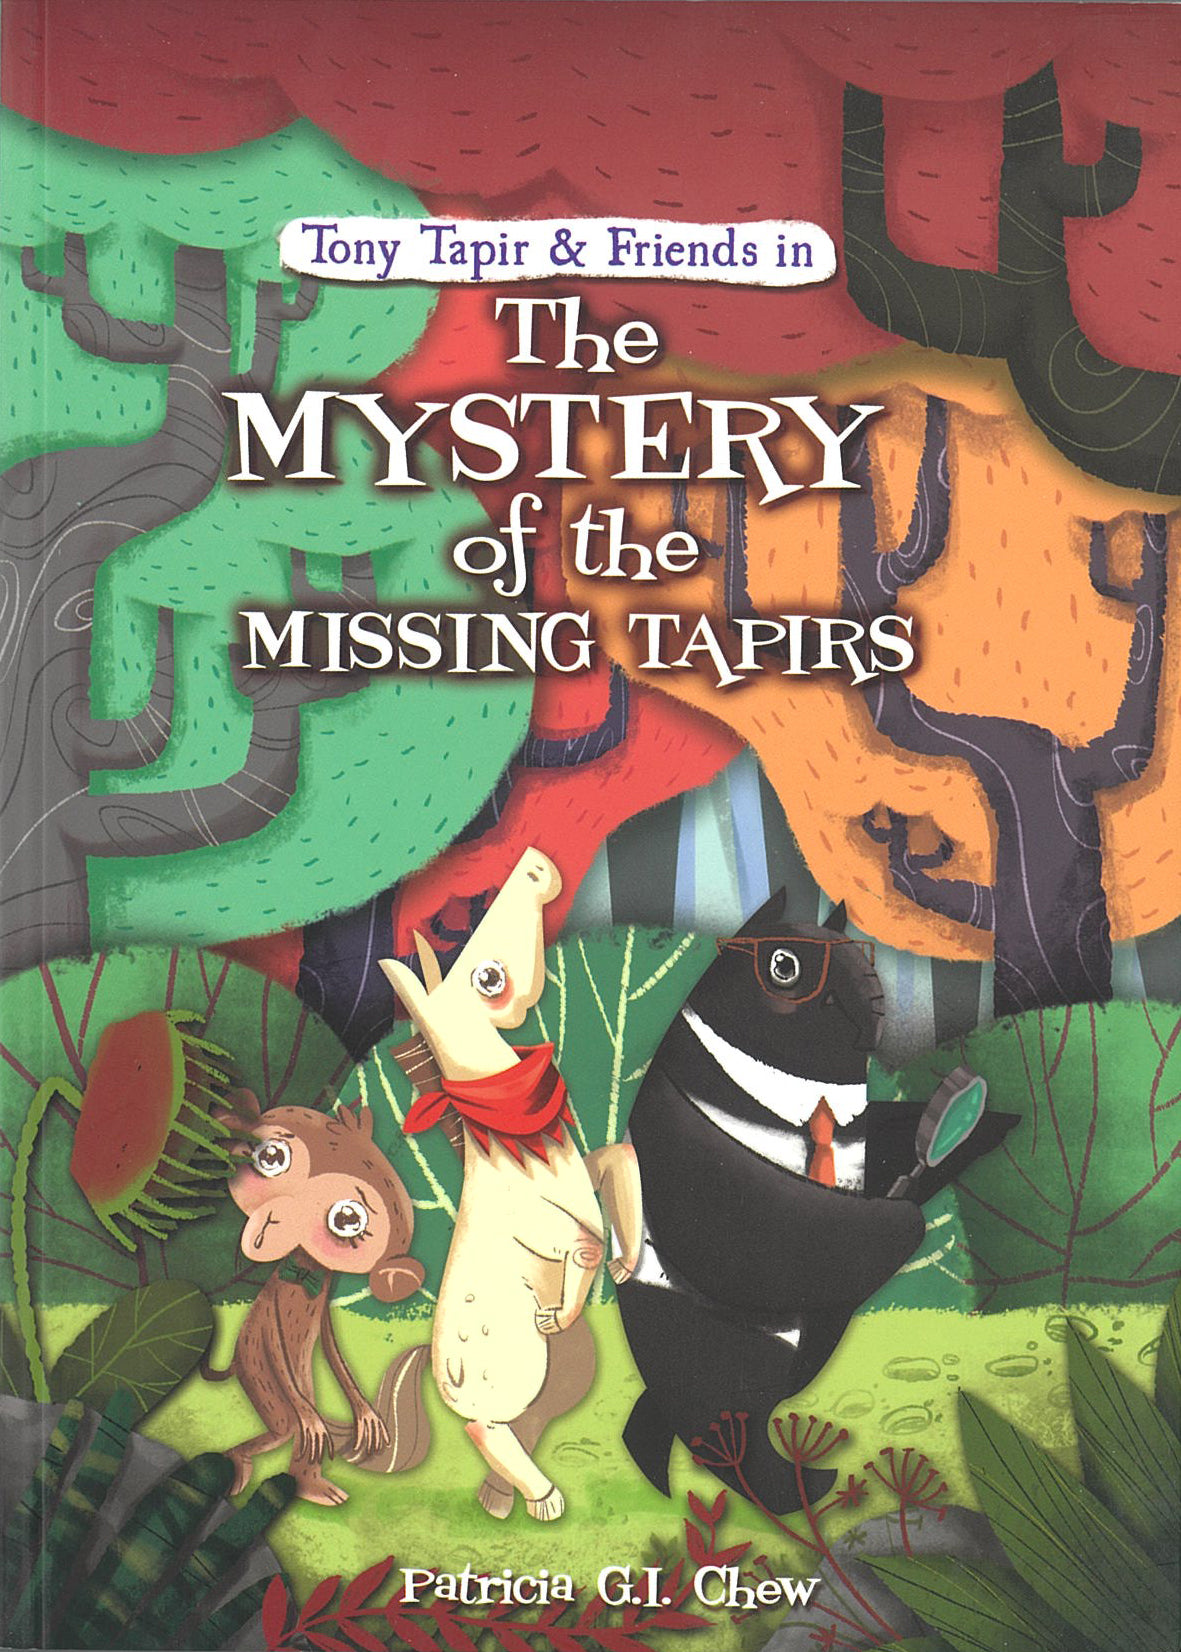 The Mystery of the Missing Tapirs